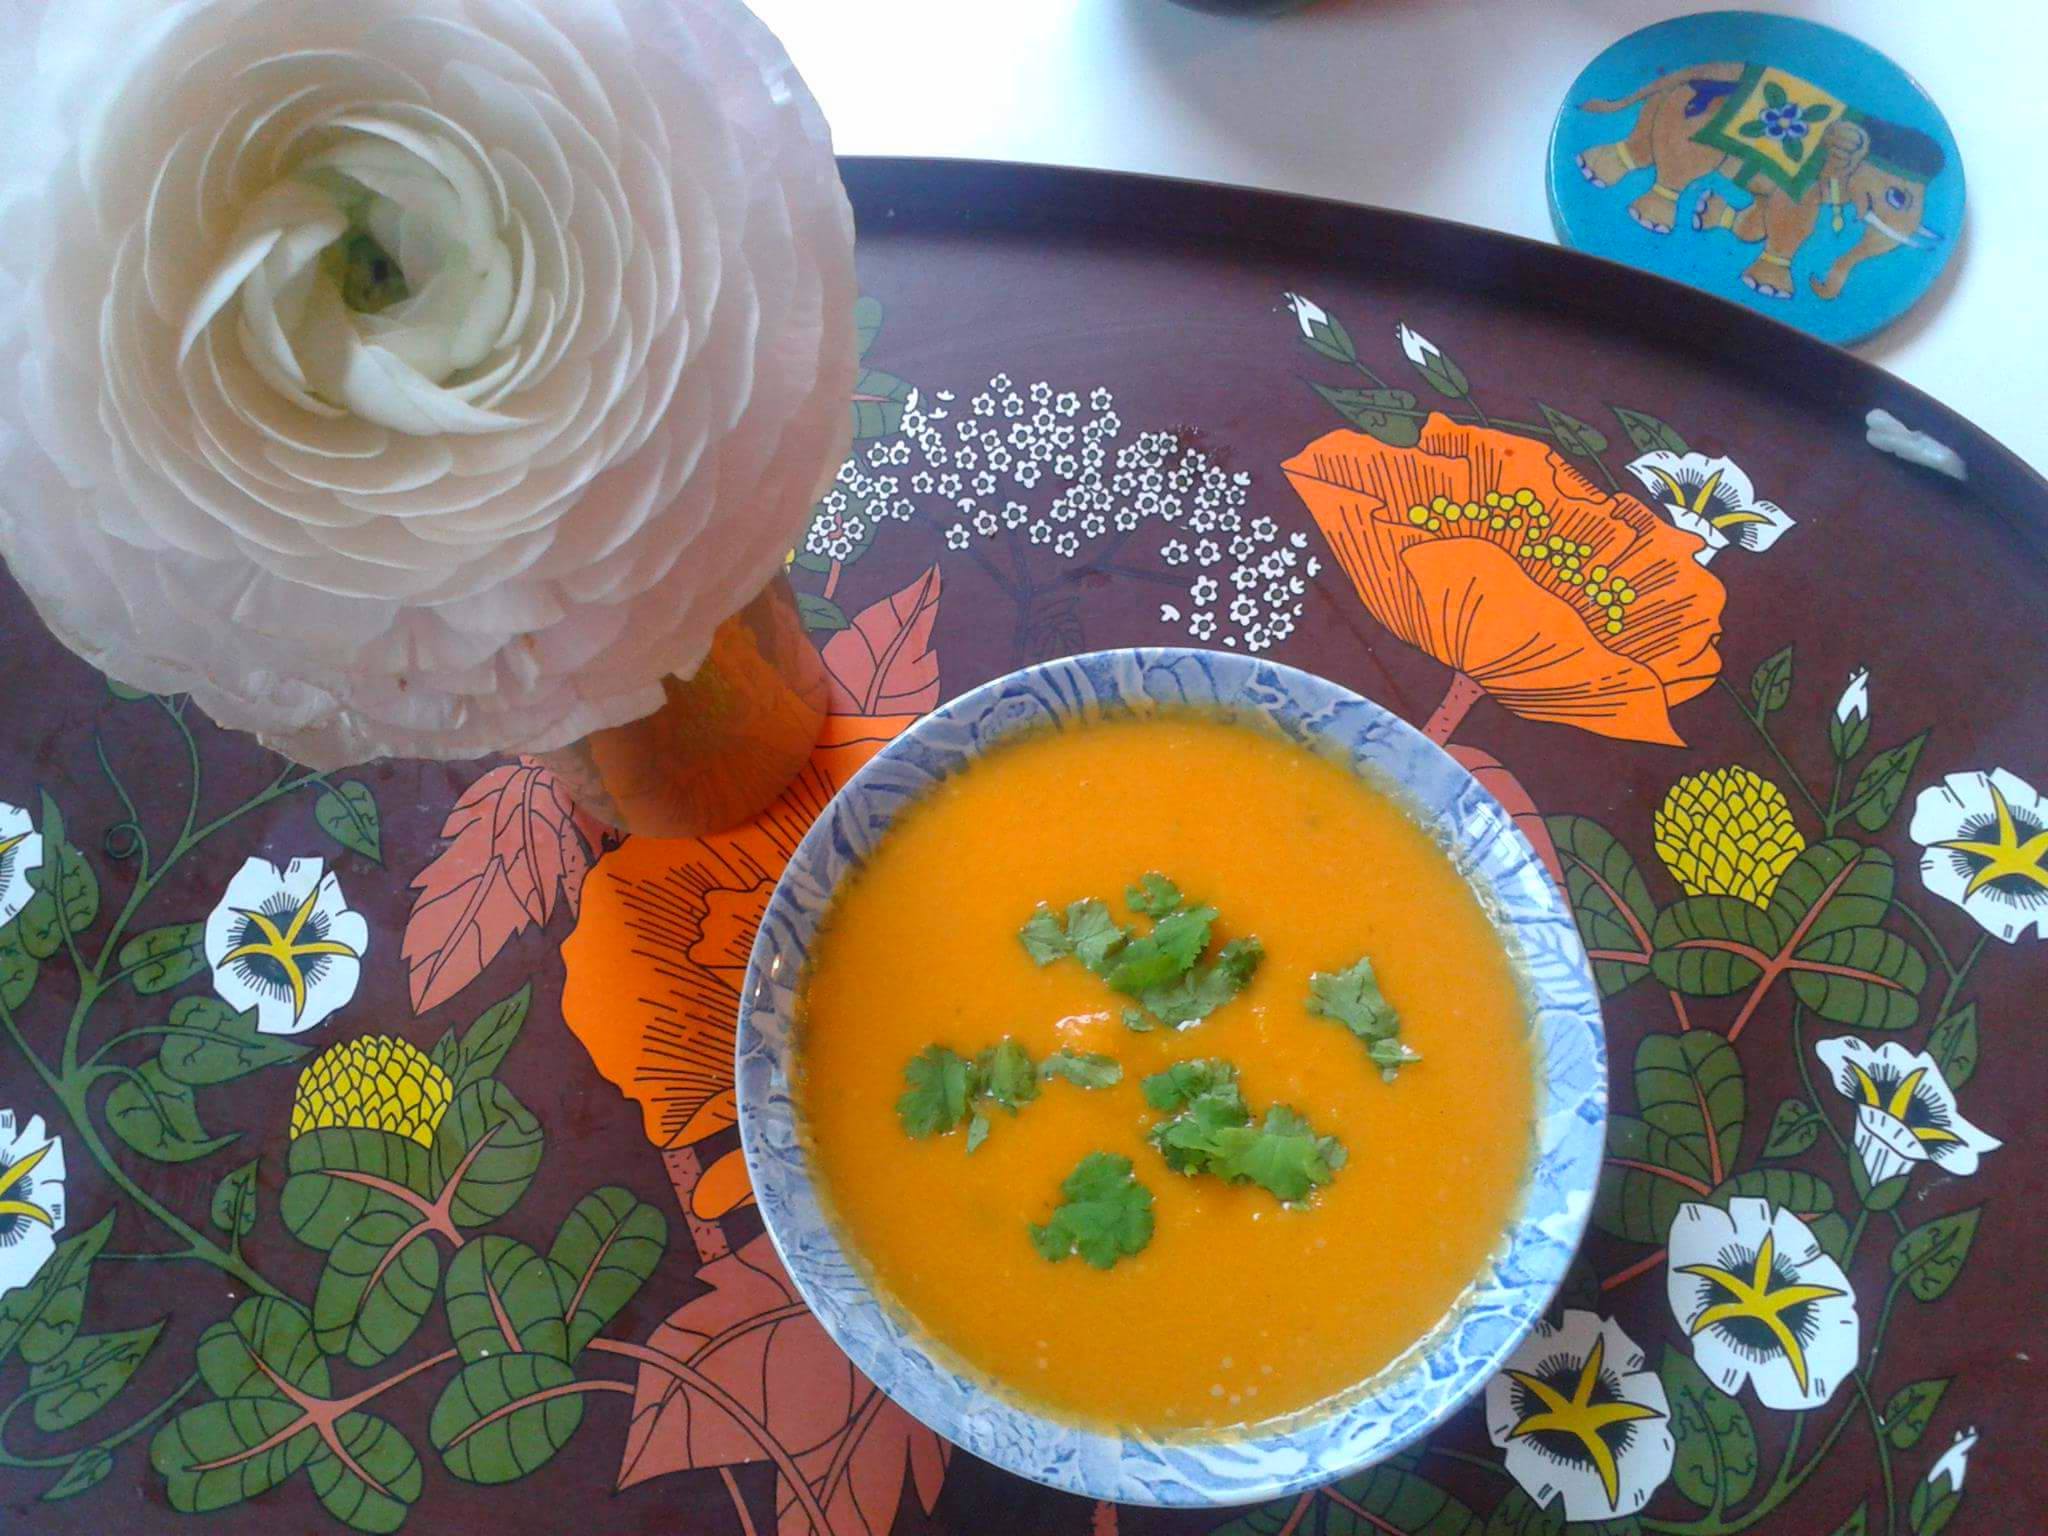 A bowl of vibrant orange soup on a 1970s vintage tray with orange flowers printed on it and a large pink rose stem in a vase